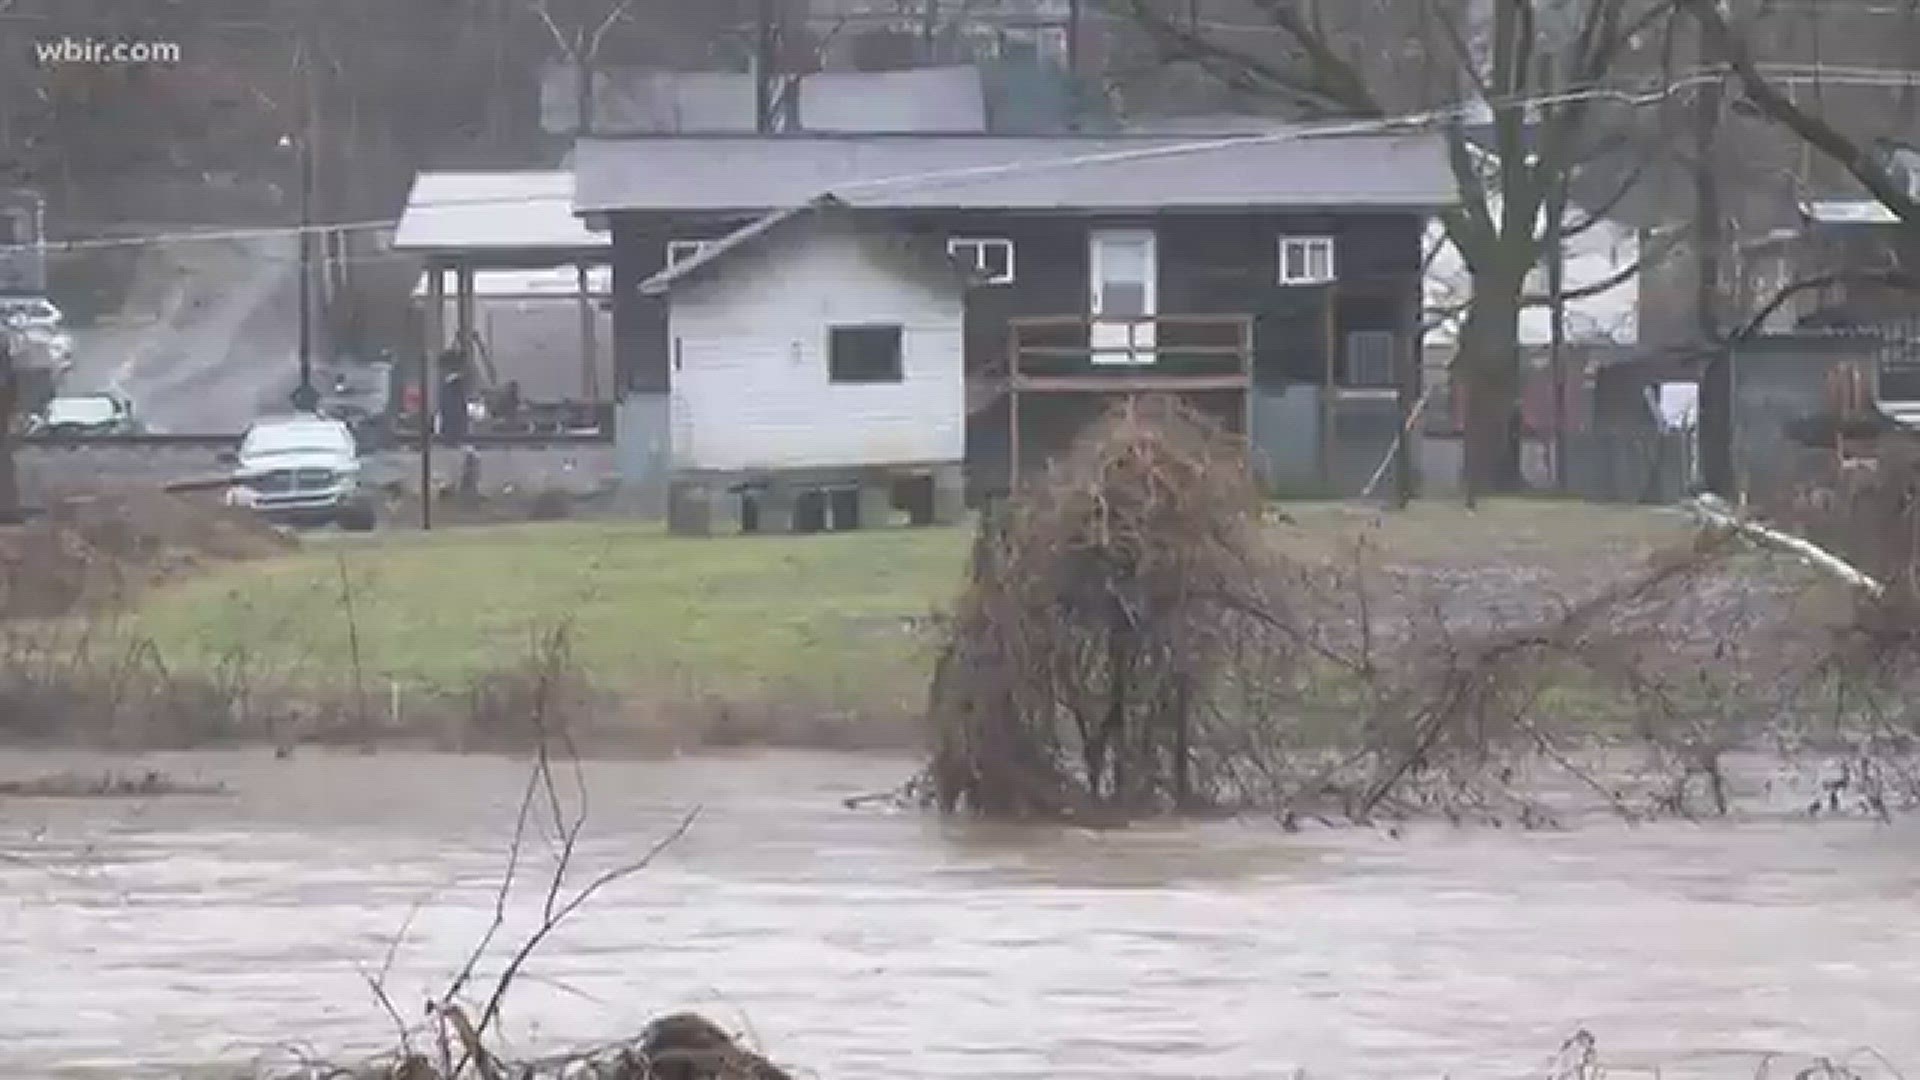 Bell County, Kentucky is dealing with flooding and a mudslide at this time.